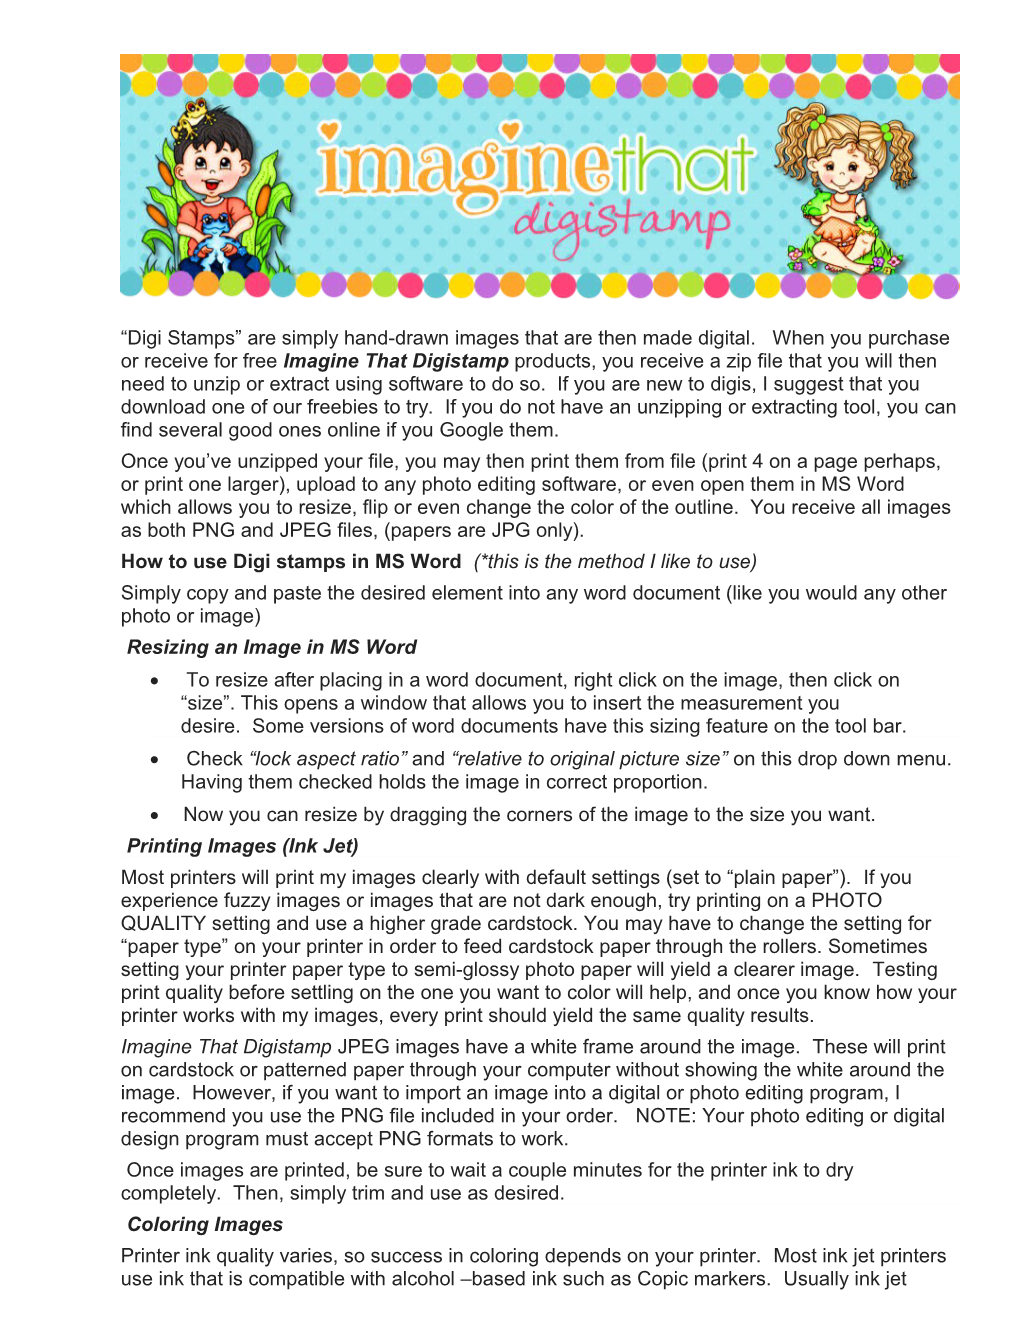 How to Use Digi Stamps in MS Word (*This Is the Method I Like to Use)